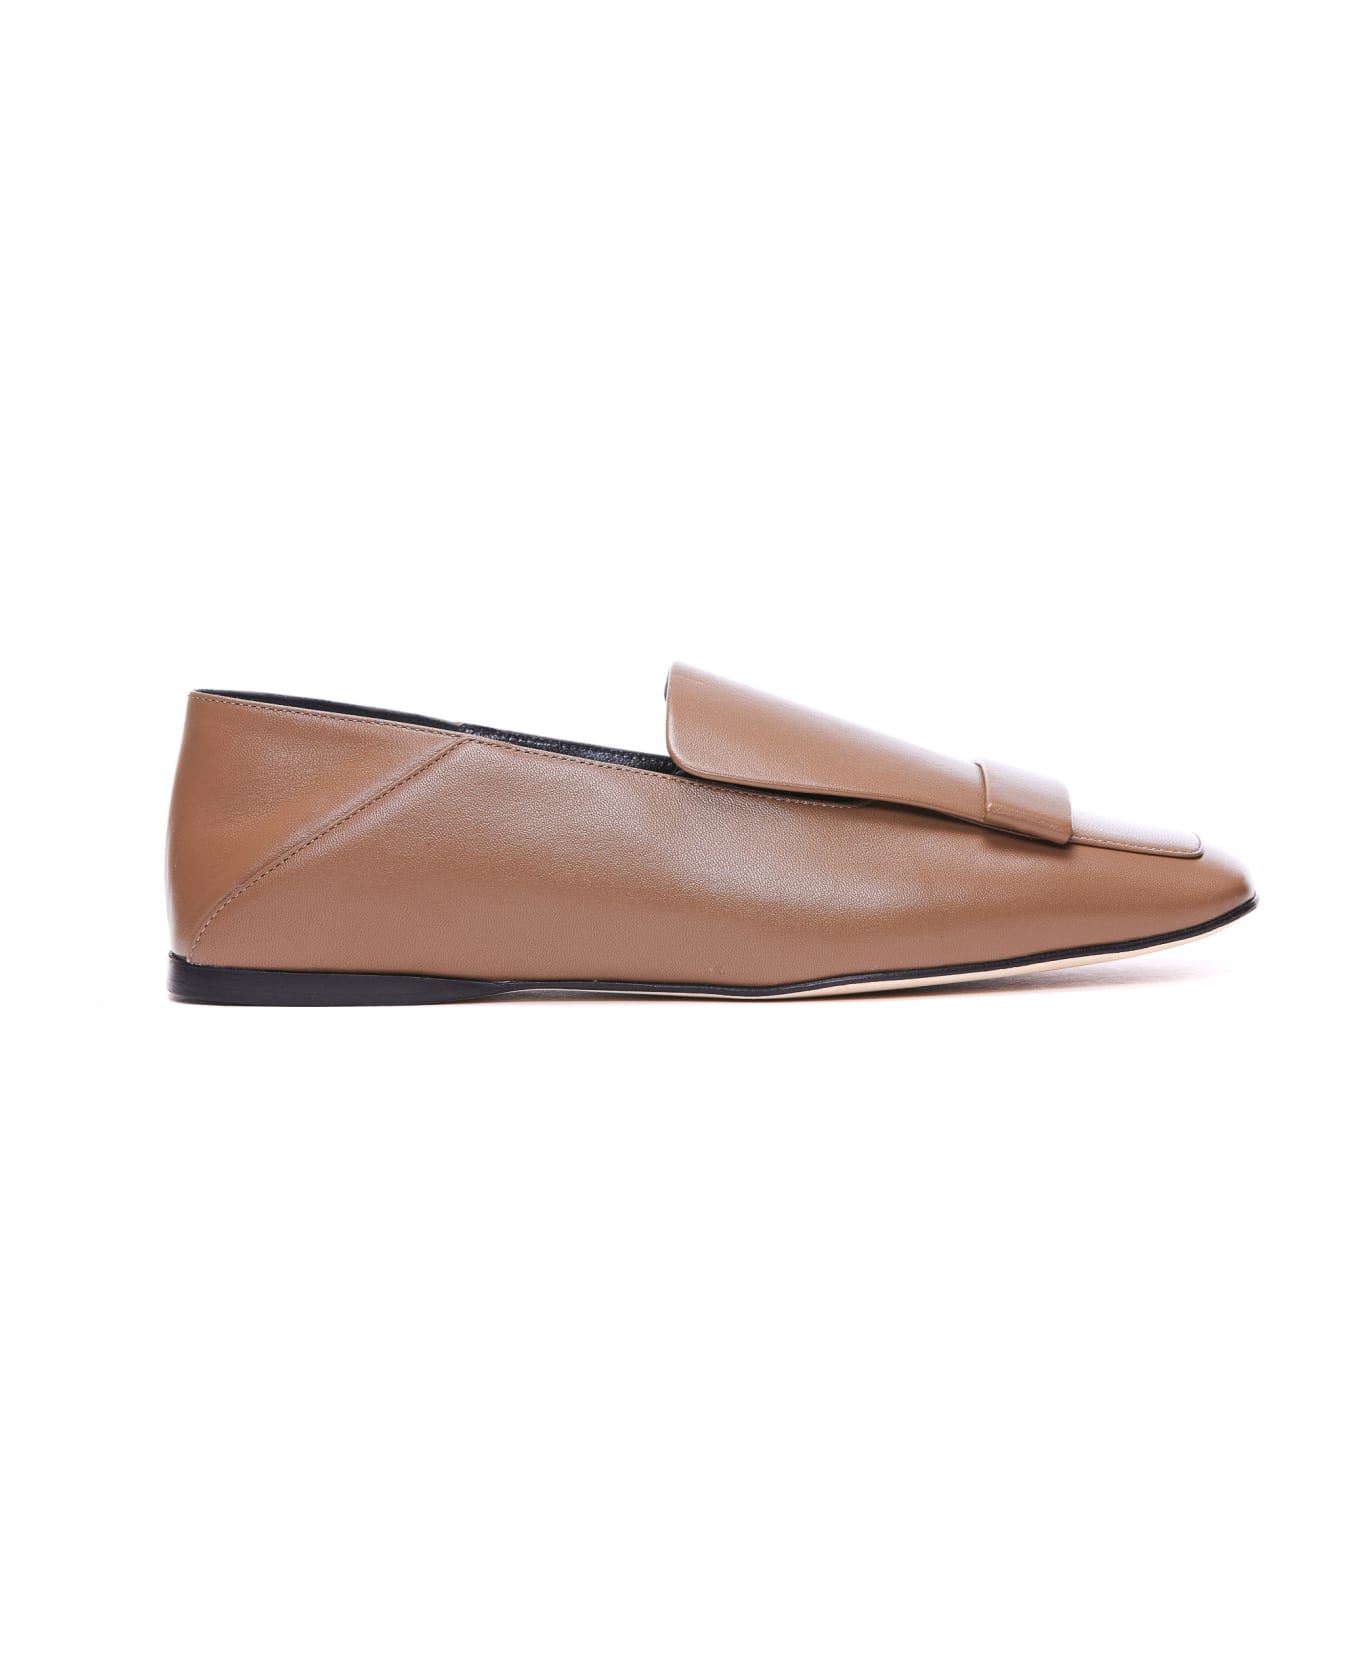 Sergio Rossi Flat Moccasin 05 - Brown